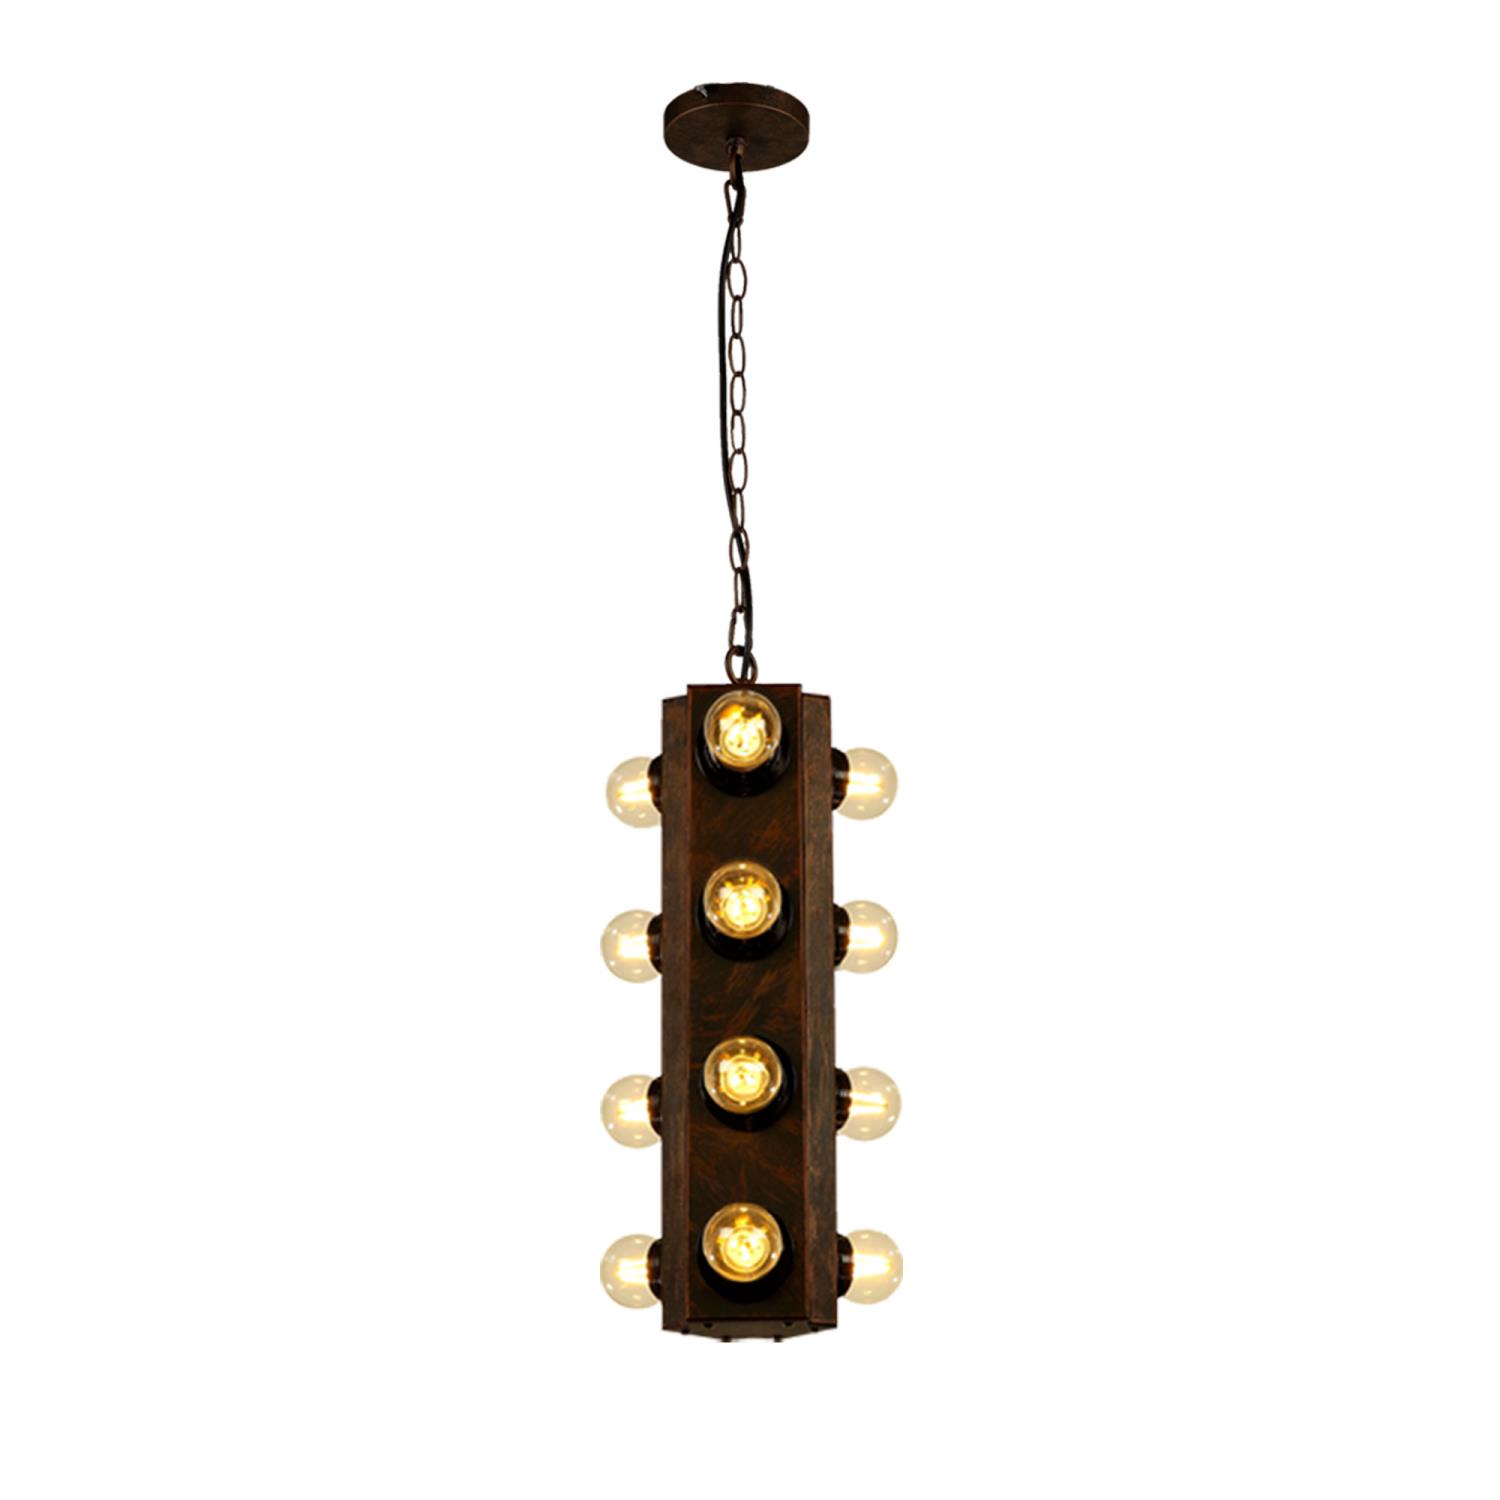 Warehouse Of Tiffany Spidler Bronze 16-Light Tower Chandelier CY-DD-330 - image 1 of 2